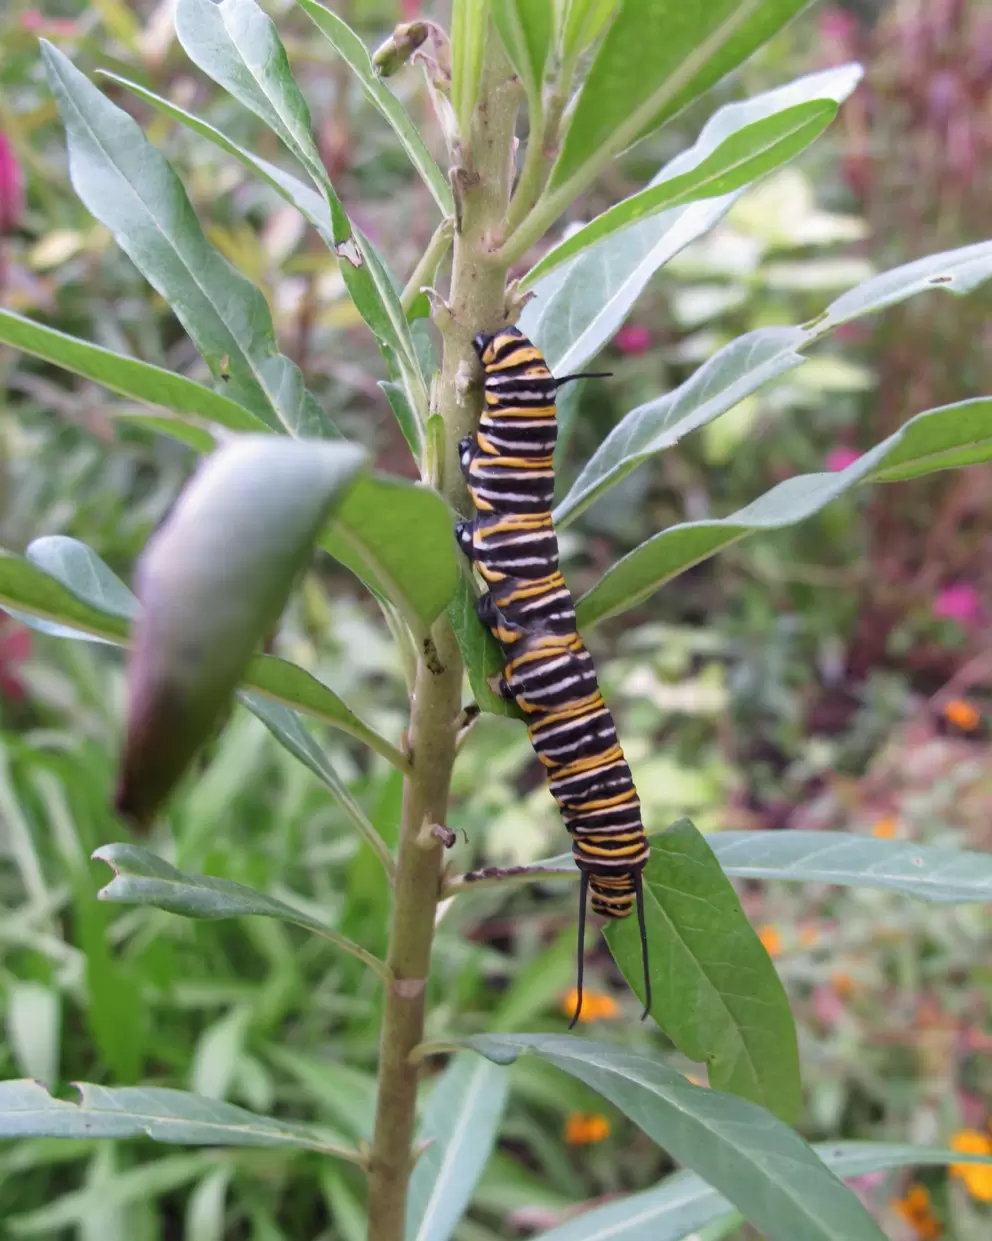 Yellow and black striped caterpillar in the butterfly garden.